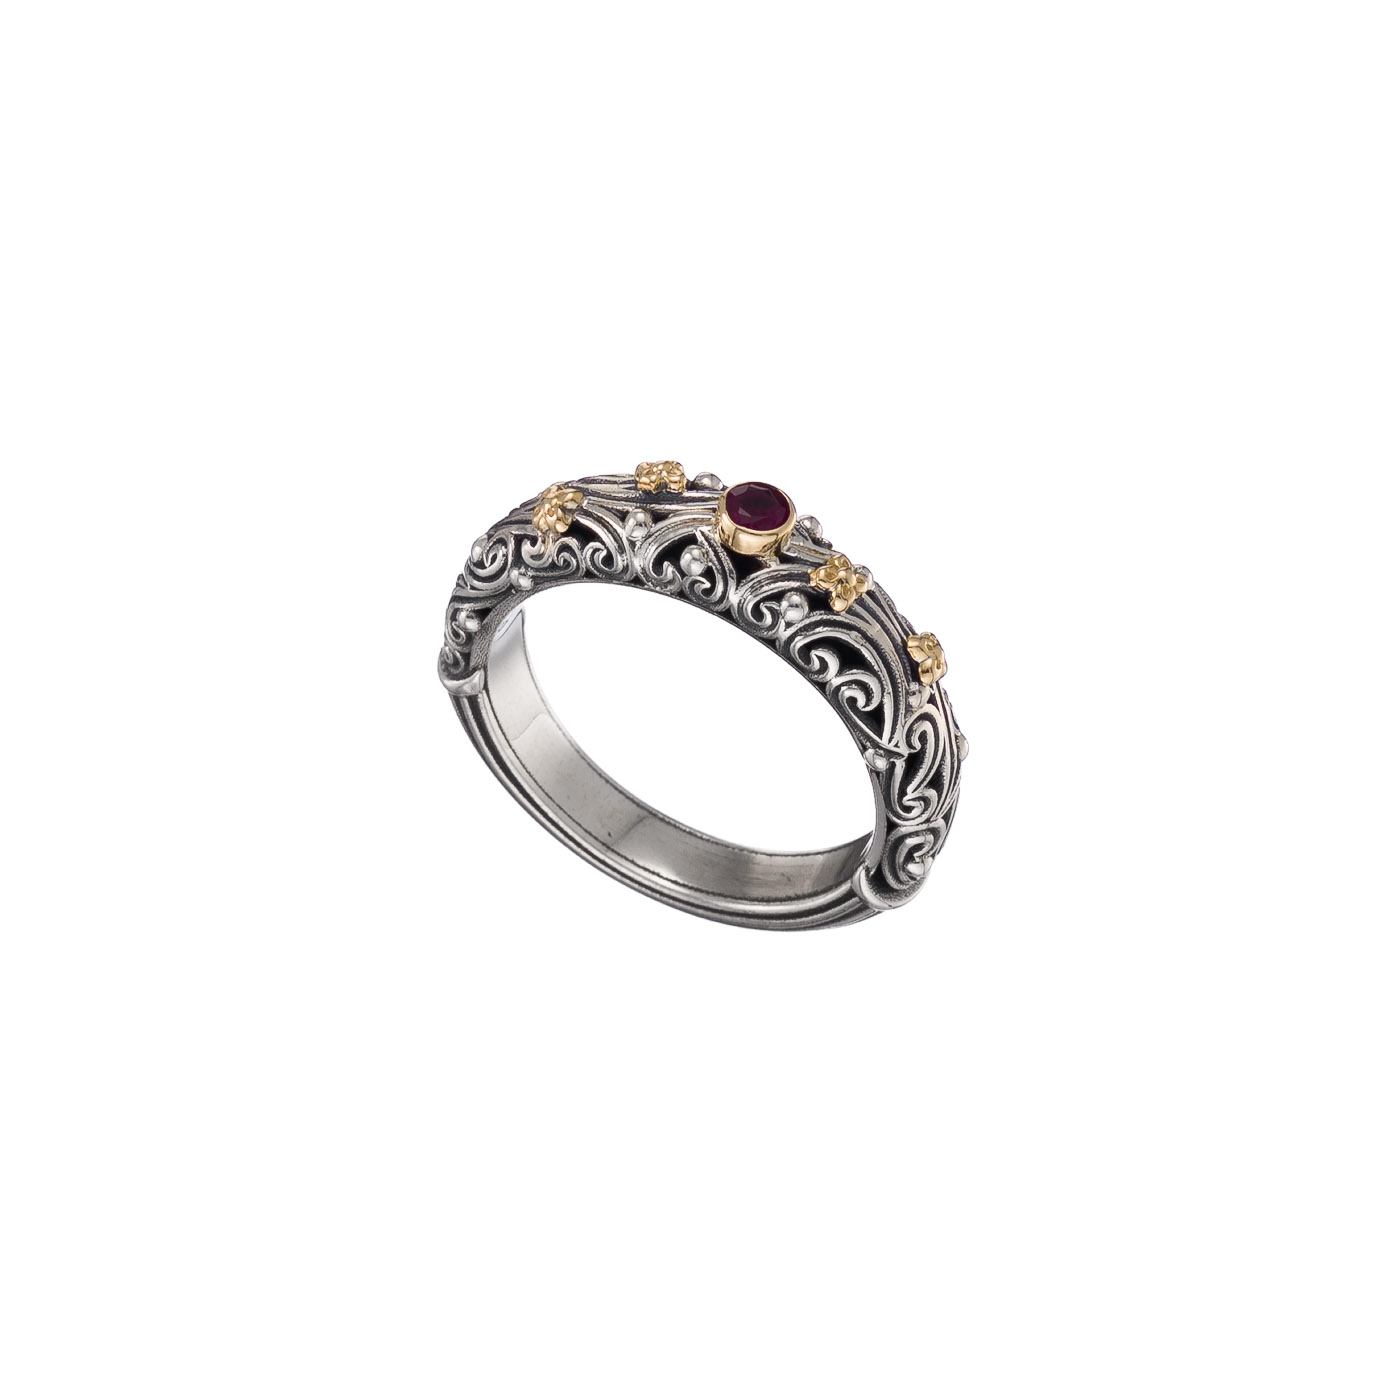 Kynthia Ring in 18K Gold and Sterling Silver with Gemstone